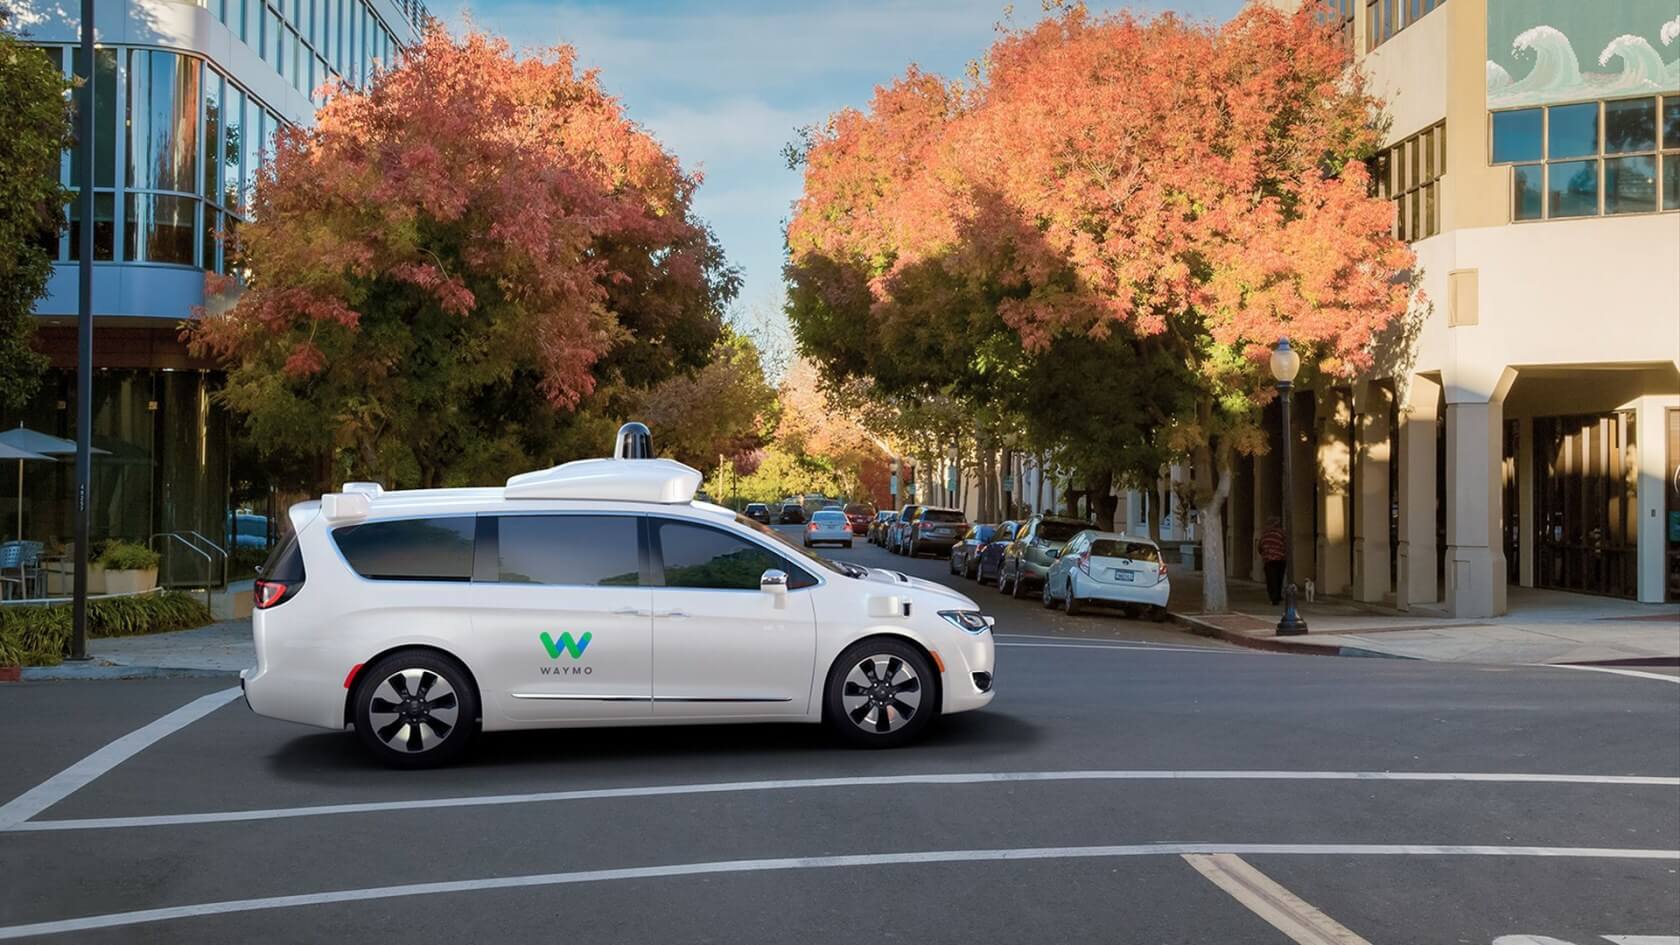 Waymo self-driving vehicle involved in non-fatal crash, company blames safety driver